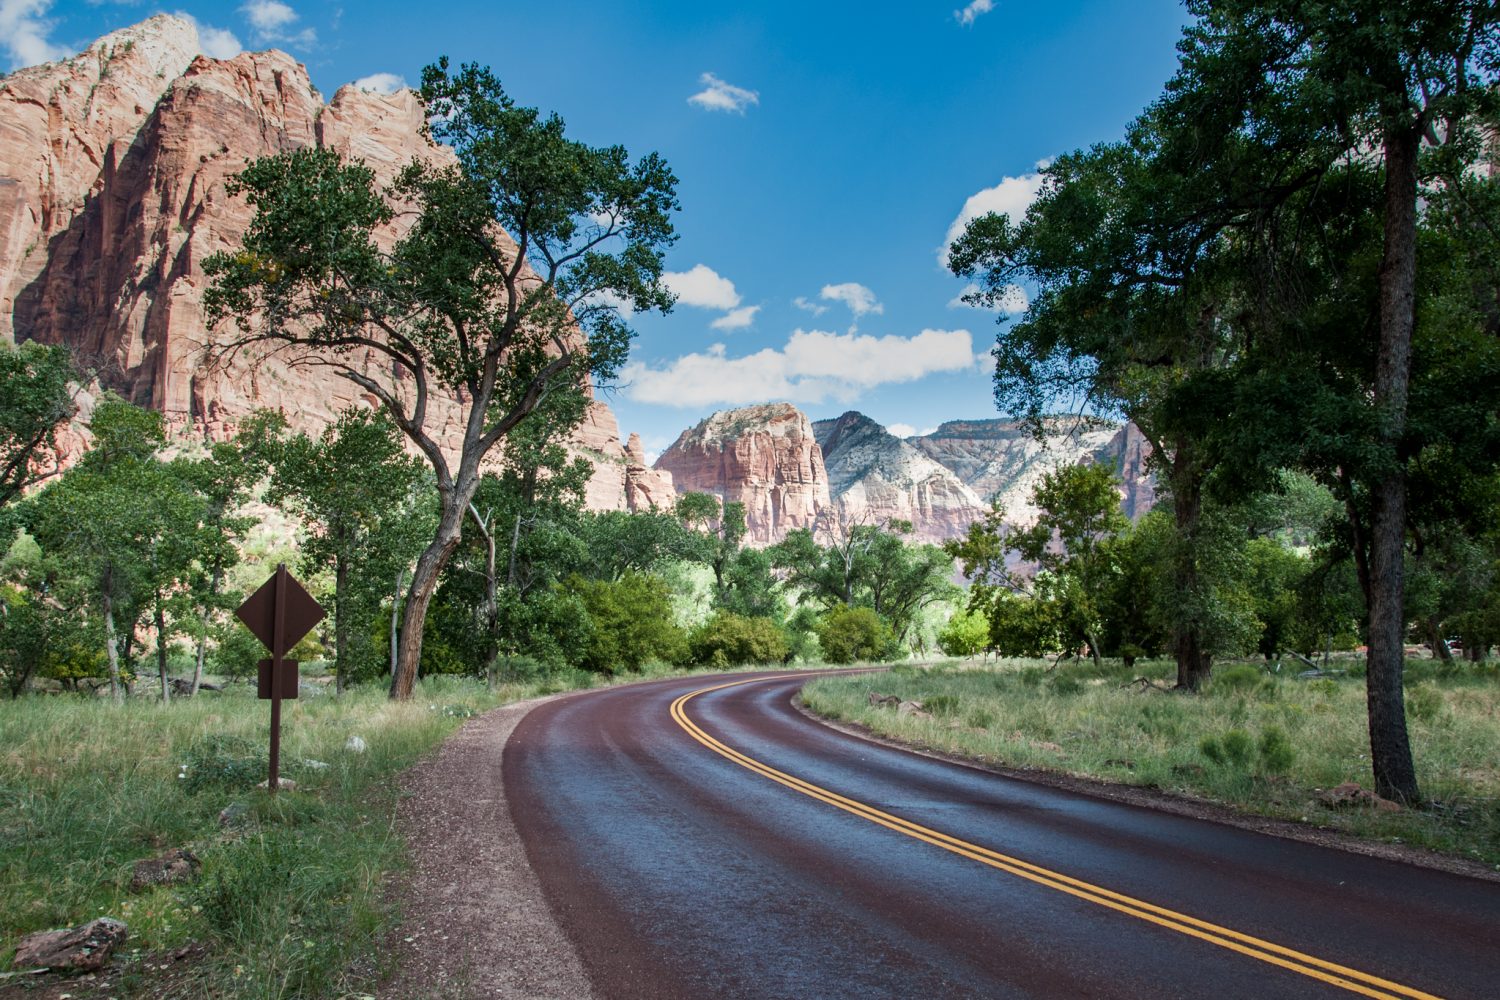 Zion Canyon Scenic Drive with the canyon's high peaks in the background in Zion National Park